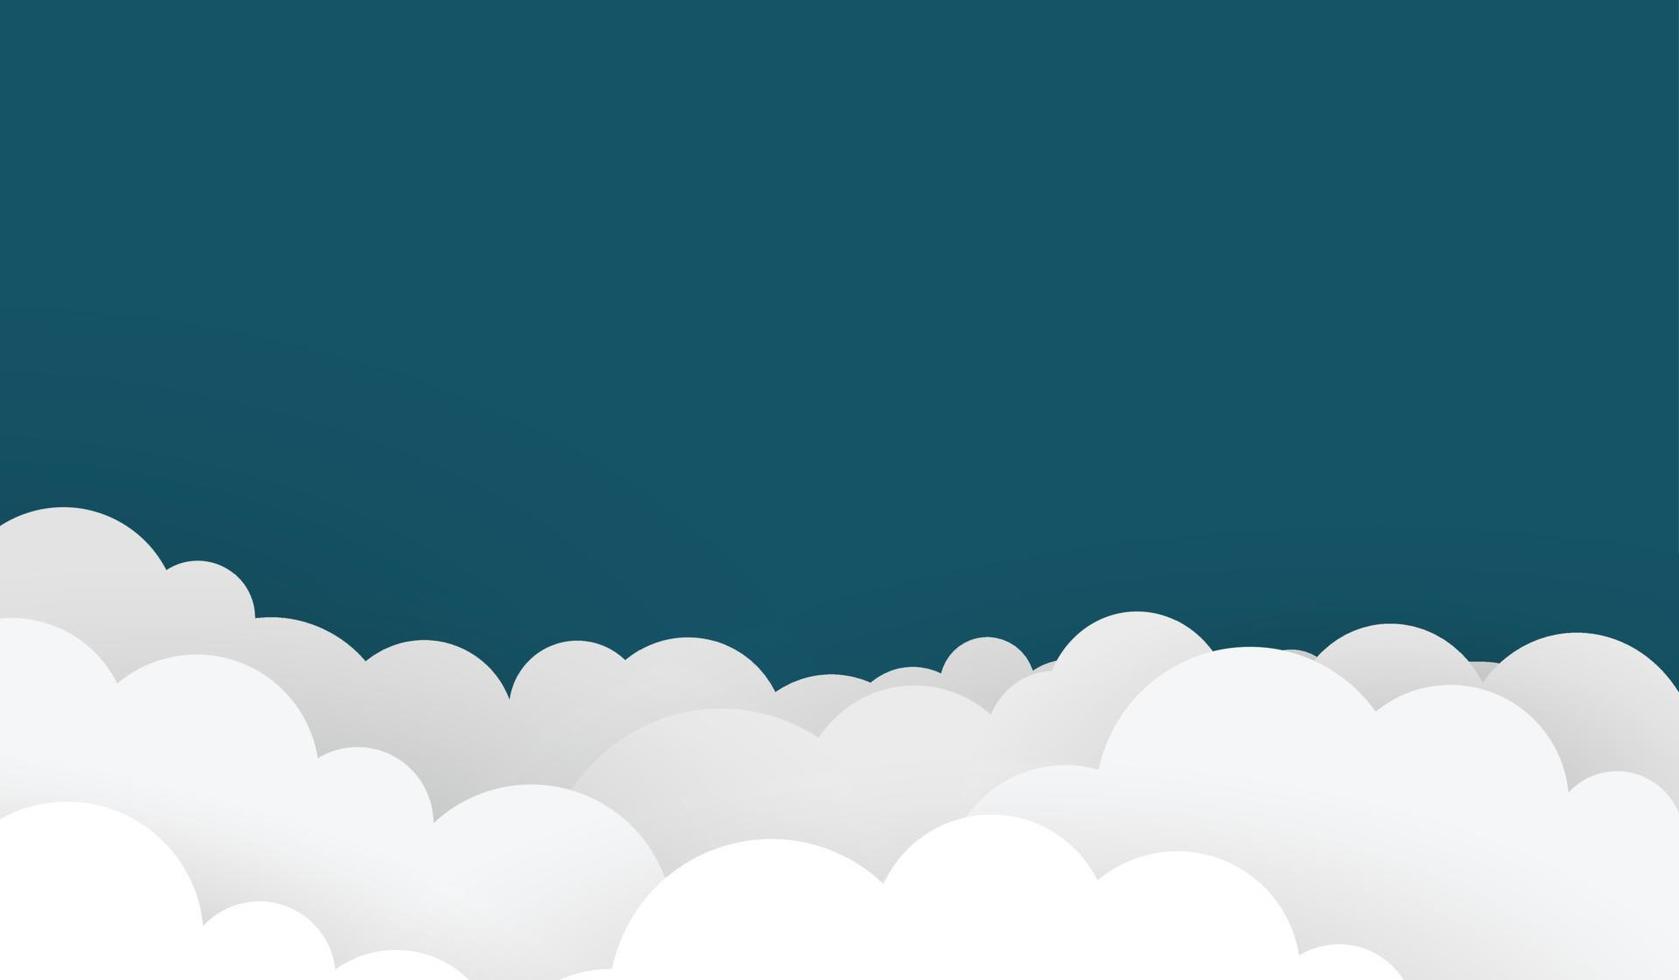 Paper cut style. business background clouds vector